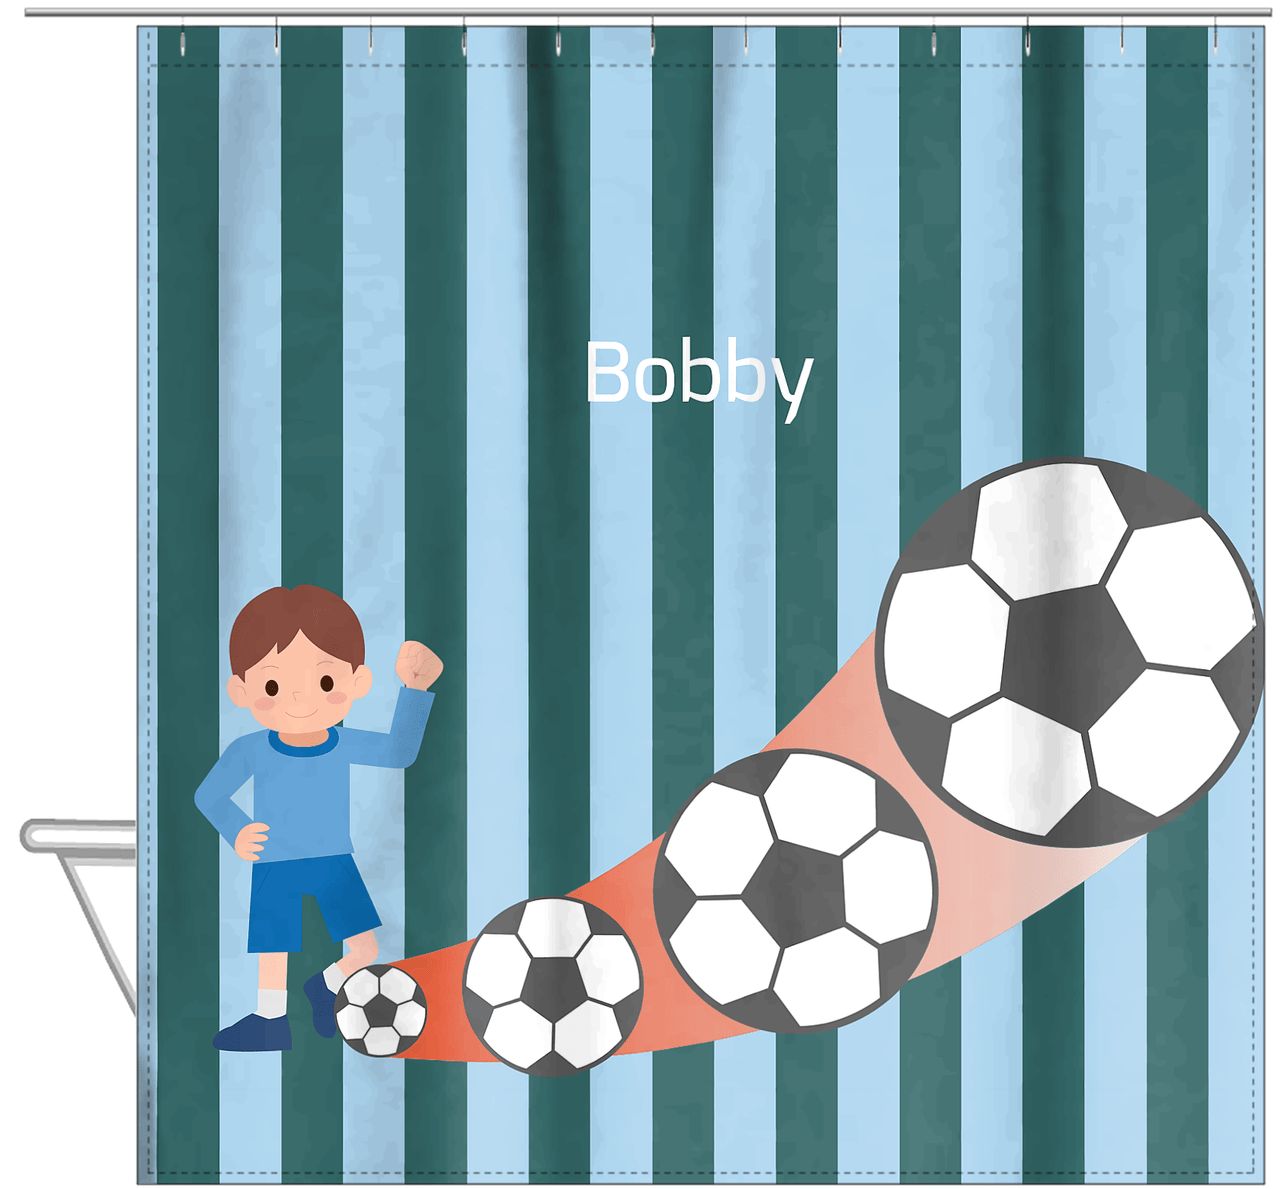 Personalized Soccer Shower Curtain III - Teal Background - Brown Hair Boy - Hanging View